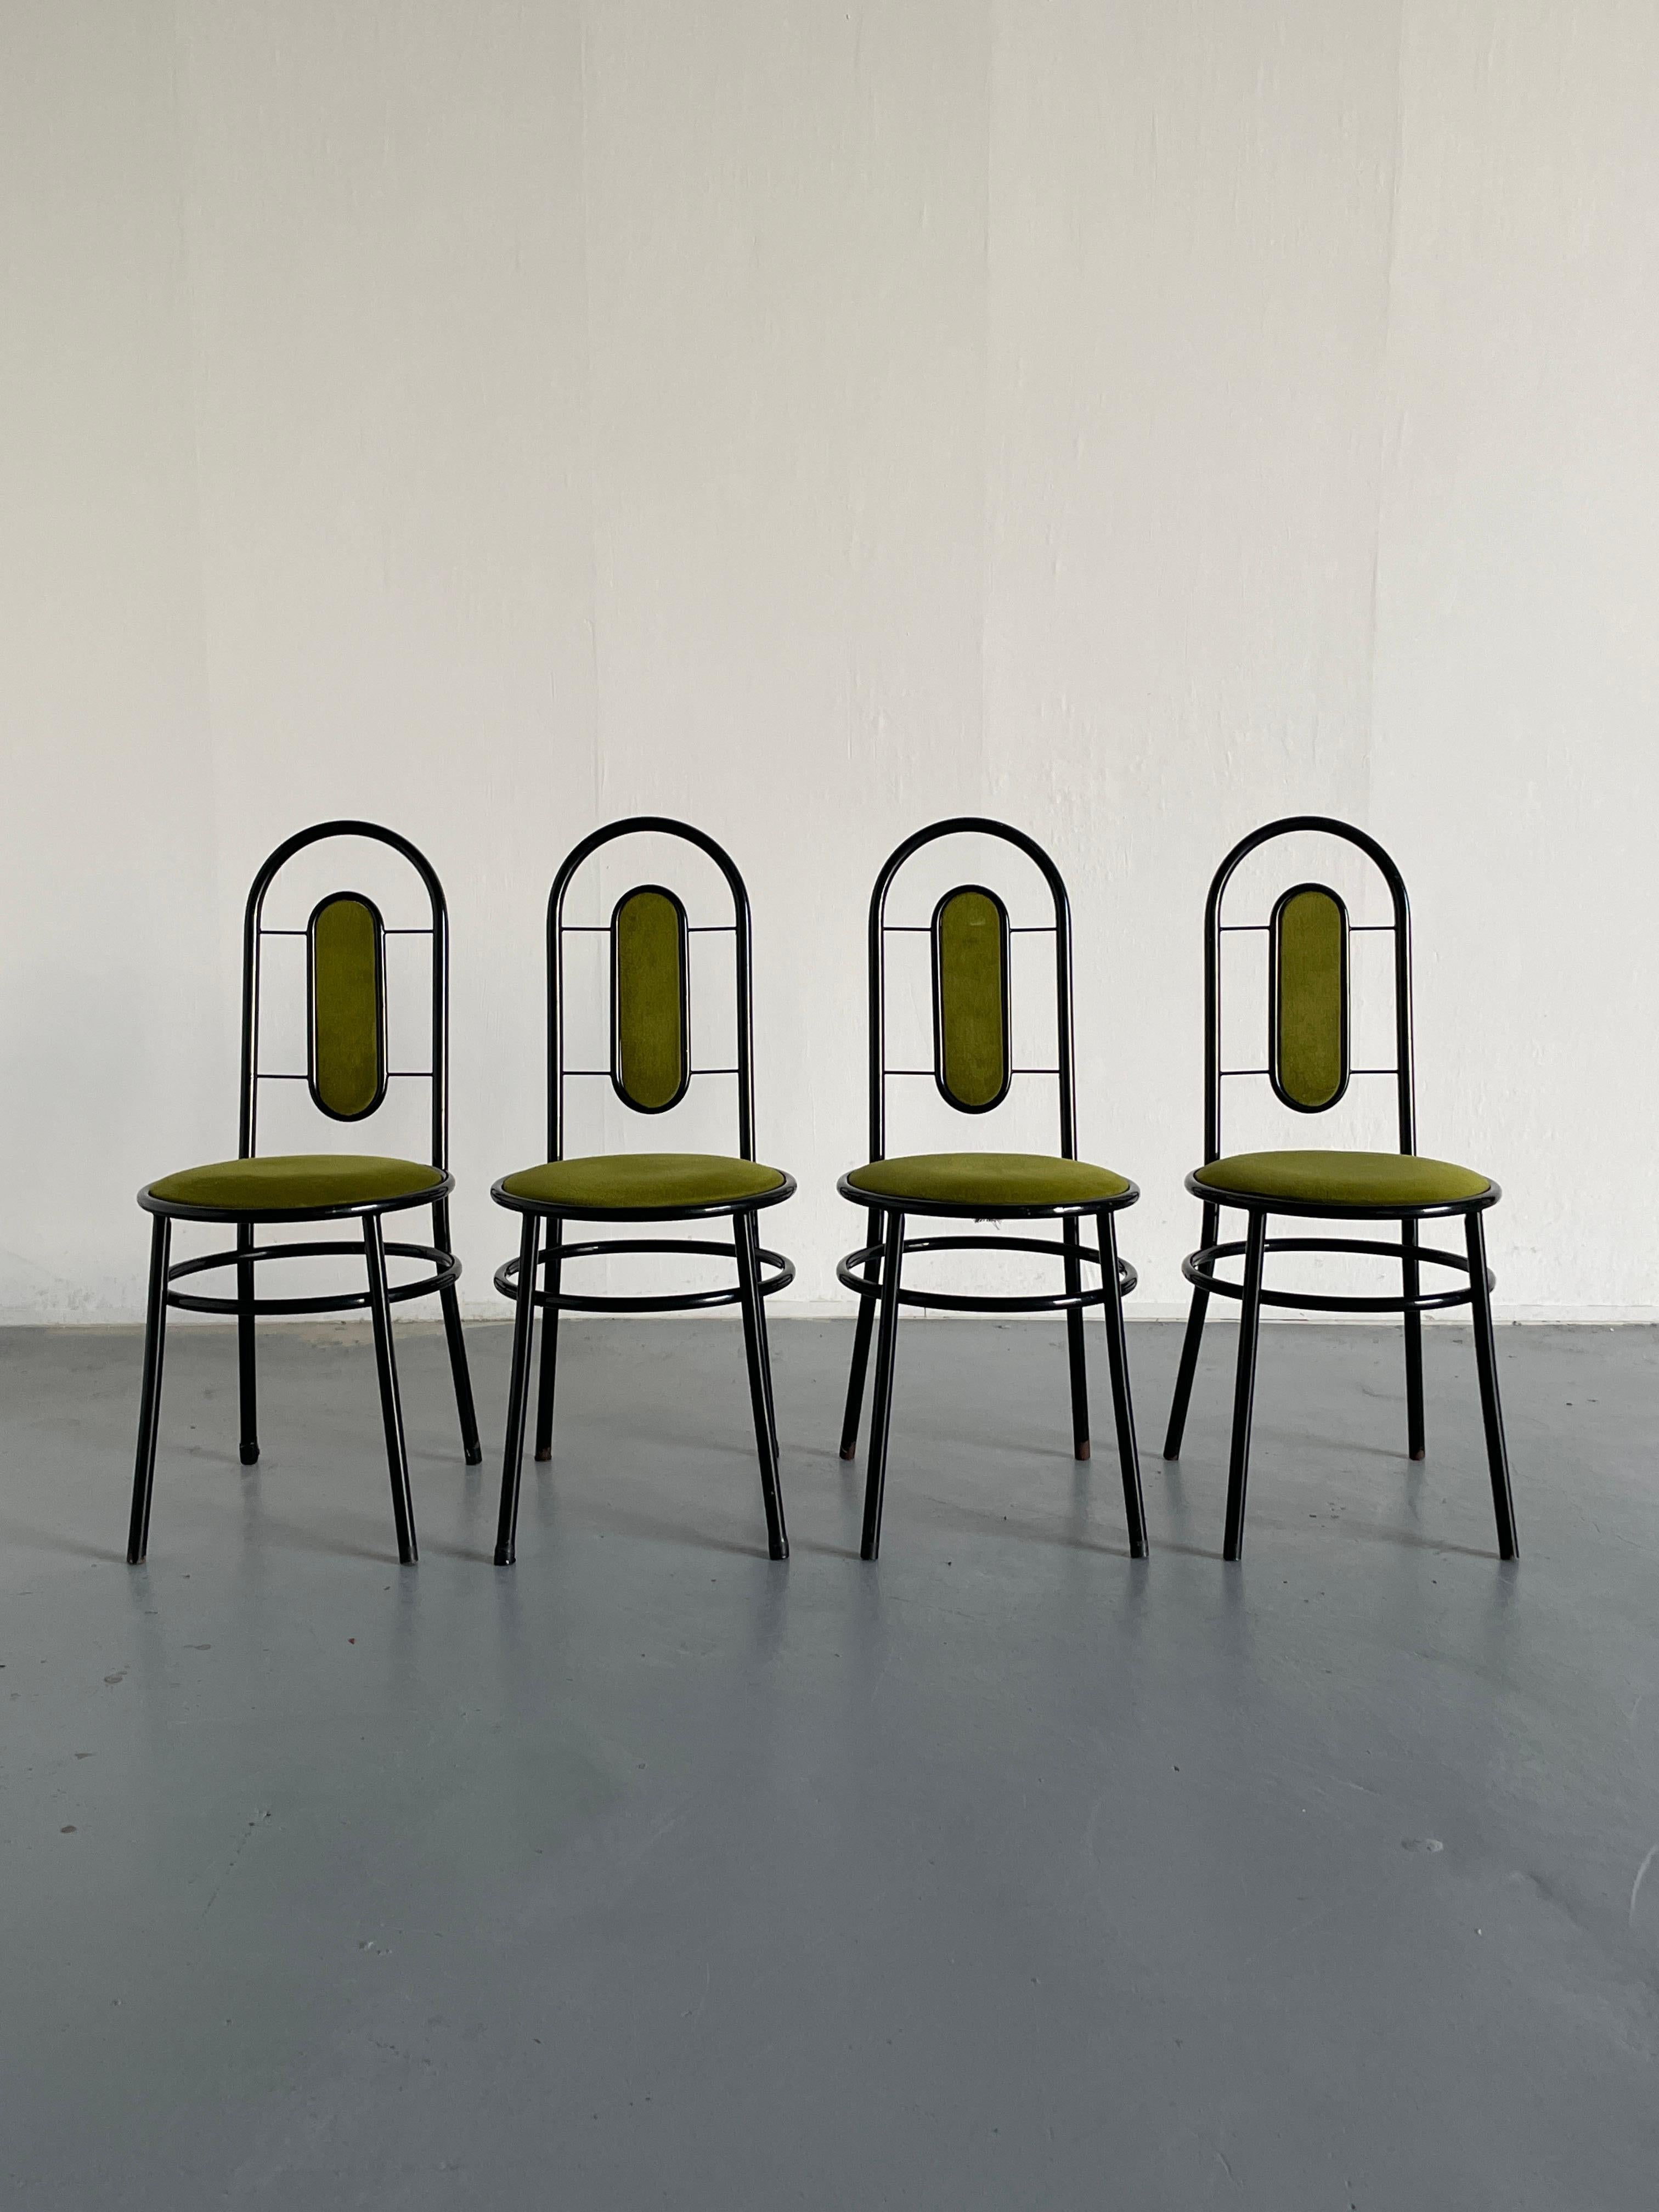 Four vintage Italian postmodernist sculptural chairs, following the Memphis Milano style.
A postmodern variation of the iconic Thonet no. 17 chair, made from a metal structure and upholstered wooden seat and backrest detail.

Unknown Italian